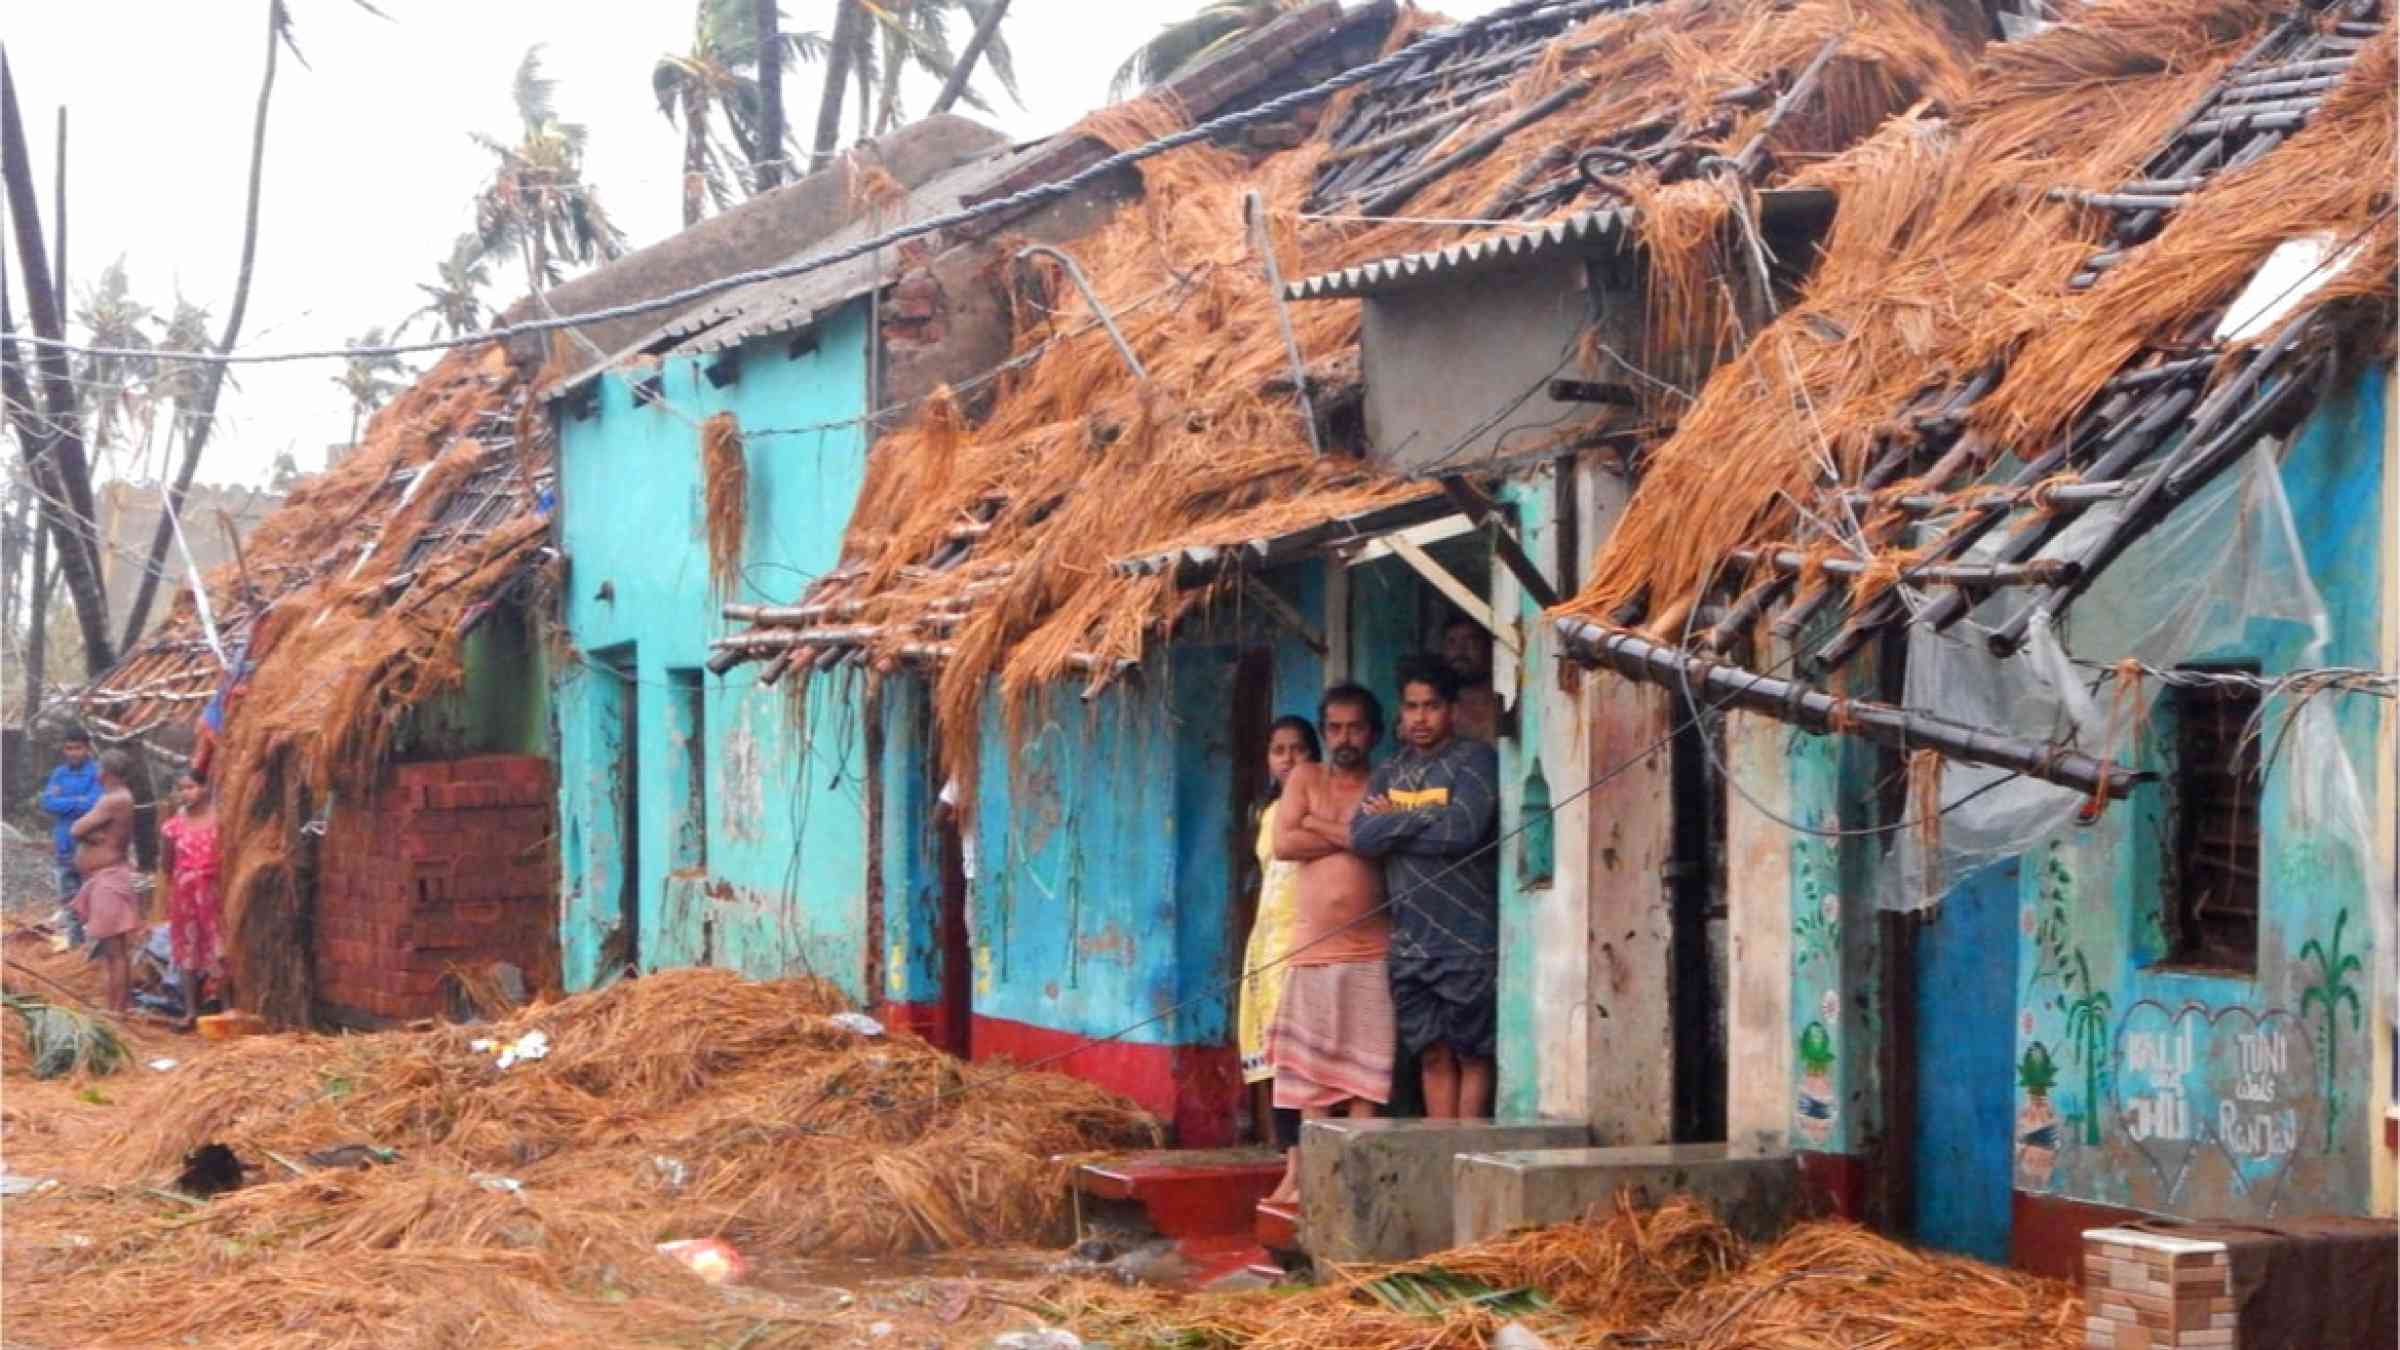 An Indian family standing outside their house after cyclone Fani devastated the neighborhood.